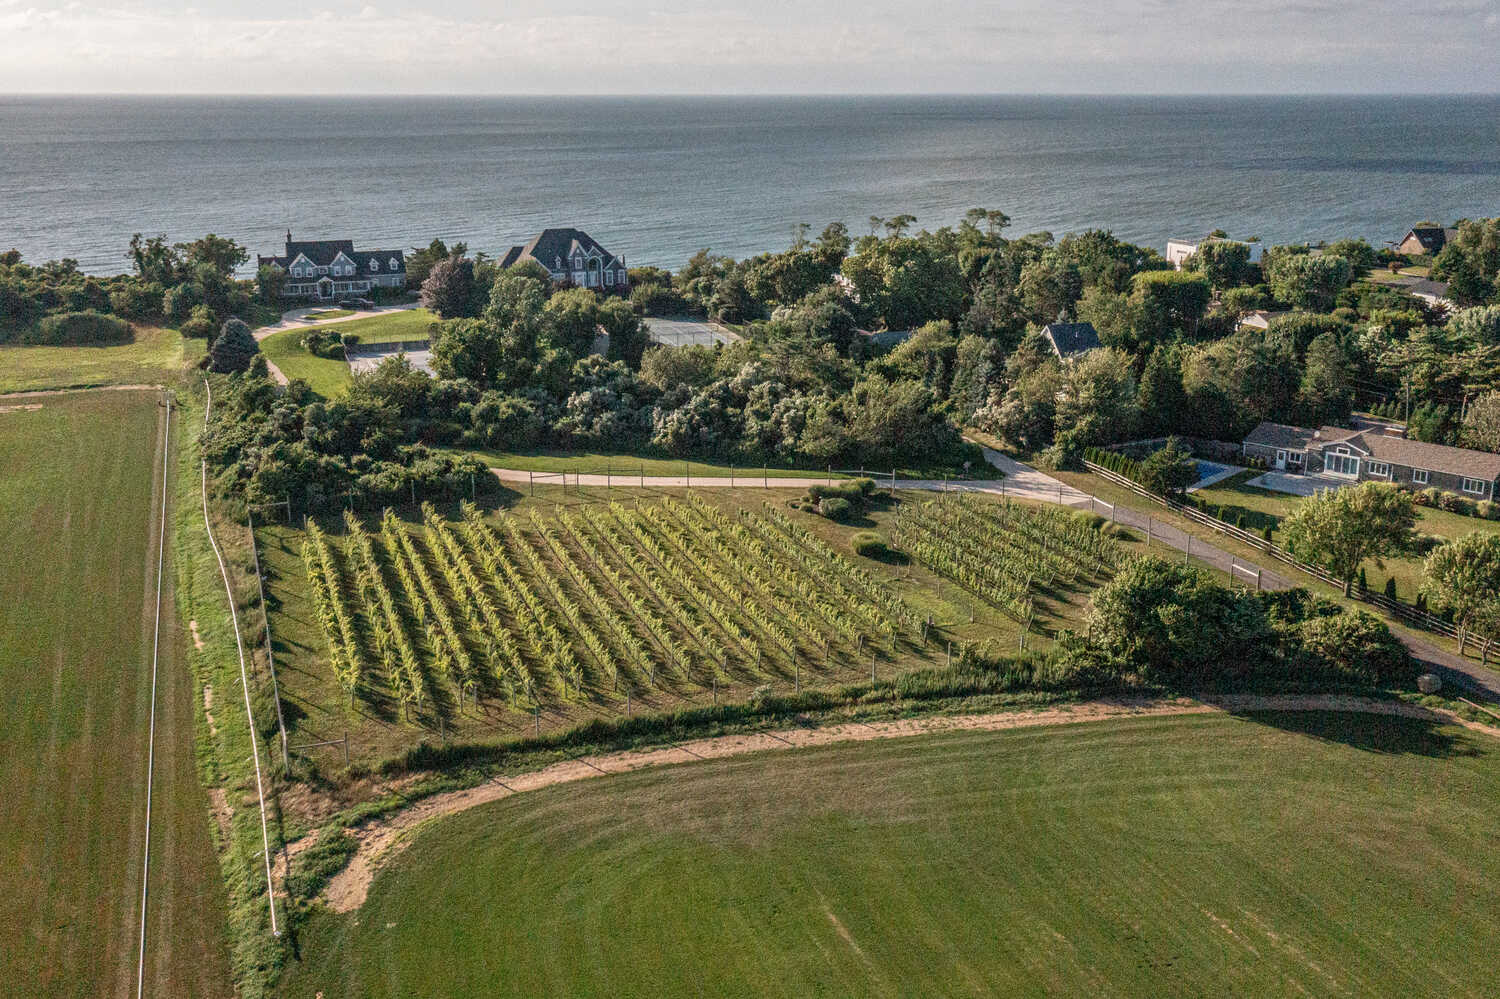 Erica Ritchie’s family planted 23 rows of grapes at Haven Vineyard, on Long Island Sound in Cutchogue N.Y., along the driveway to their vacation house.